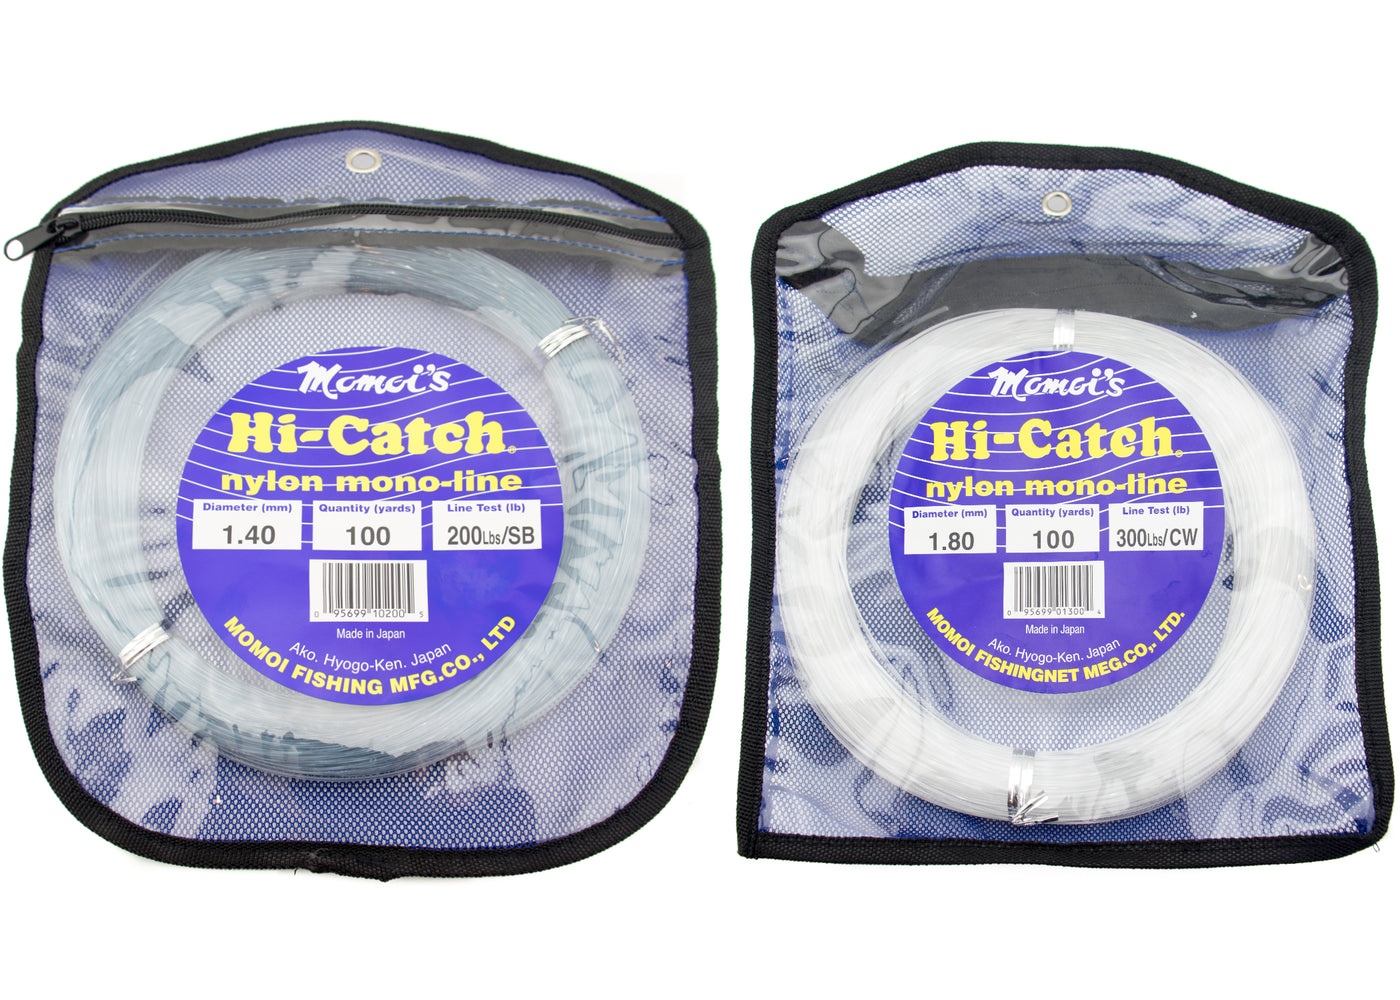 Momoi Hi-Catch Nylon Monofilament Leader Material – White Water Outfitters